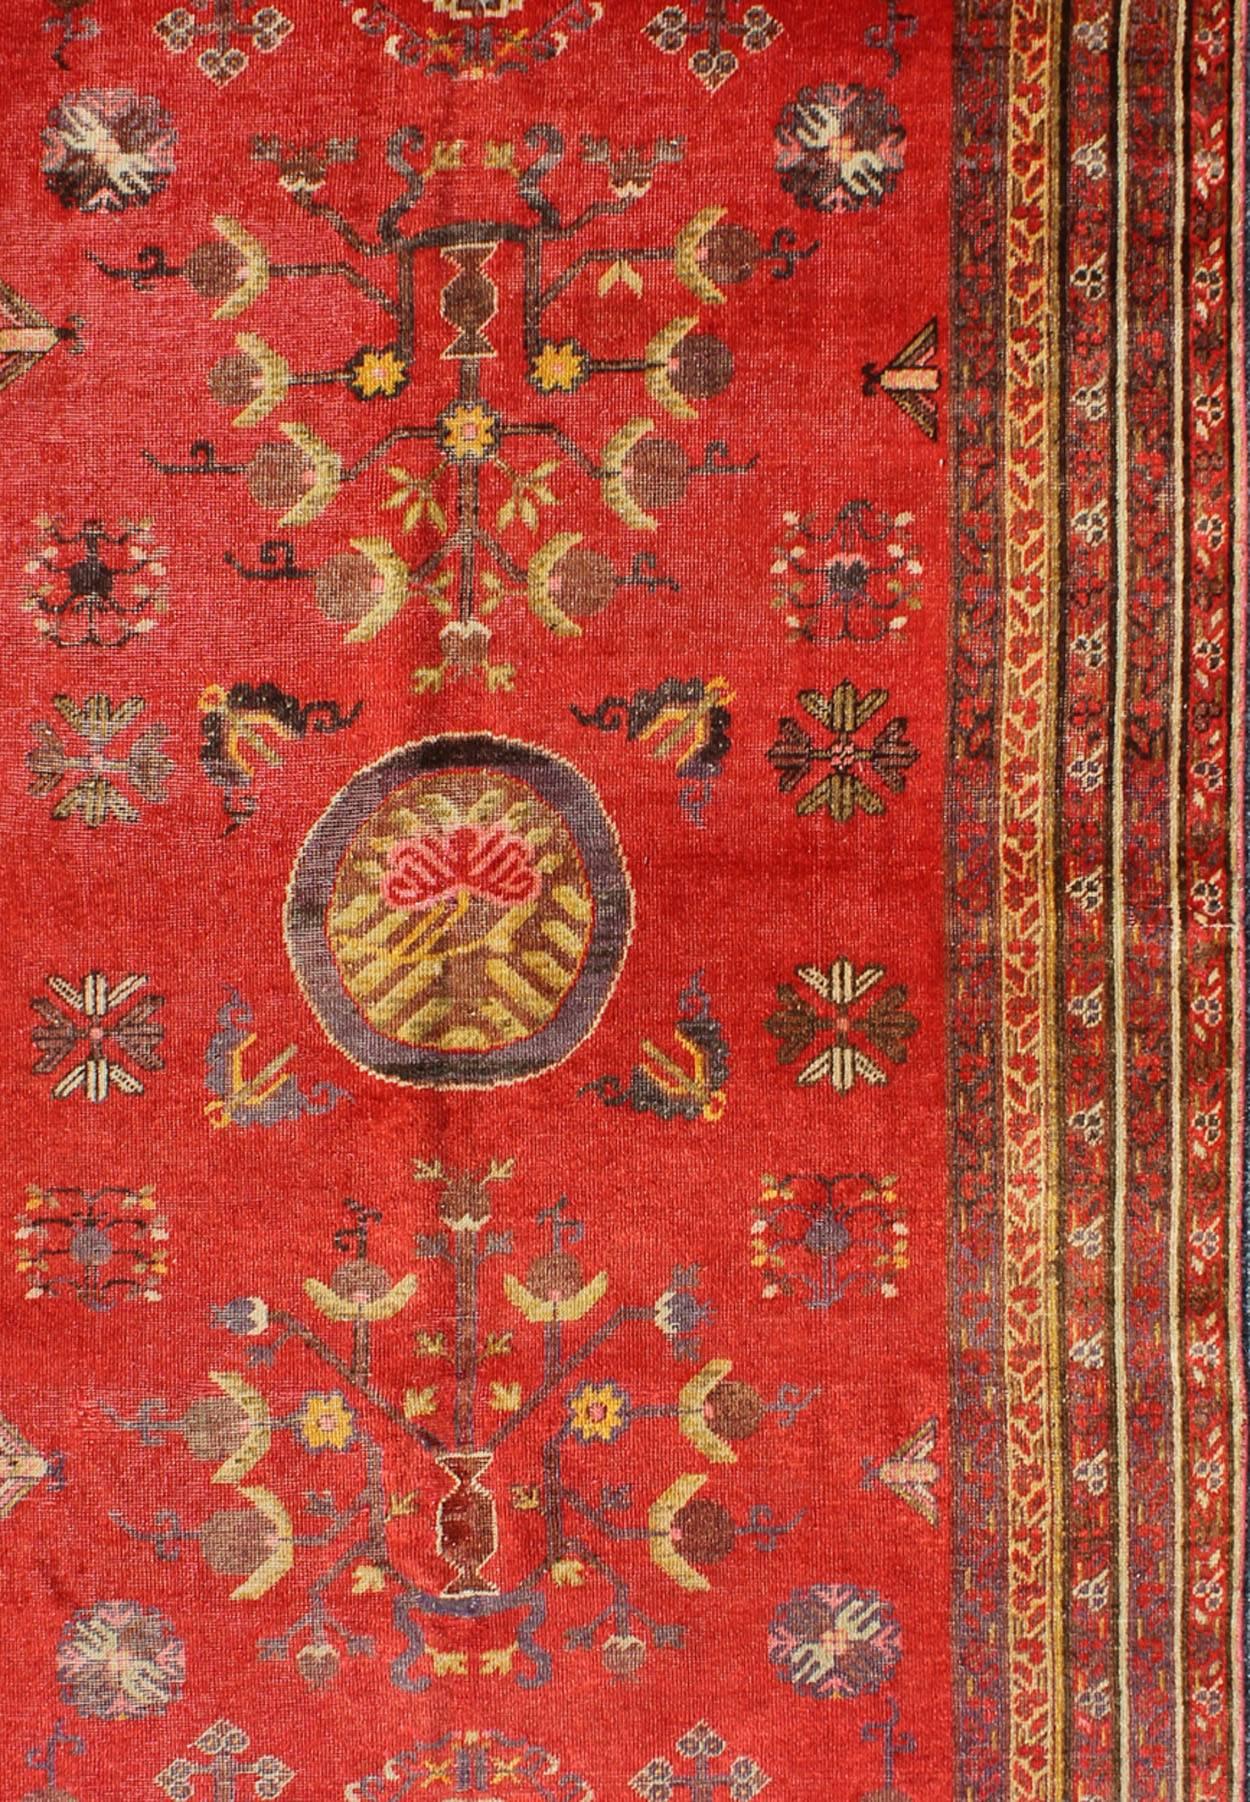 Hand-Knotted Vibrant Khotan Rug in Red with All-Over Sub-Geometric Floral Design For Sale